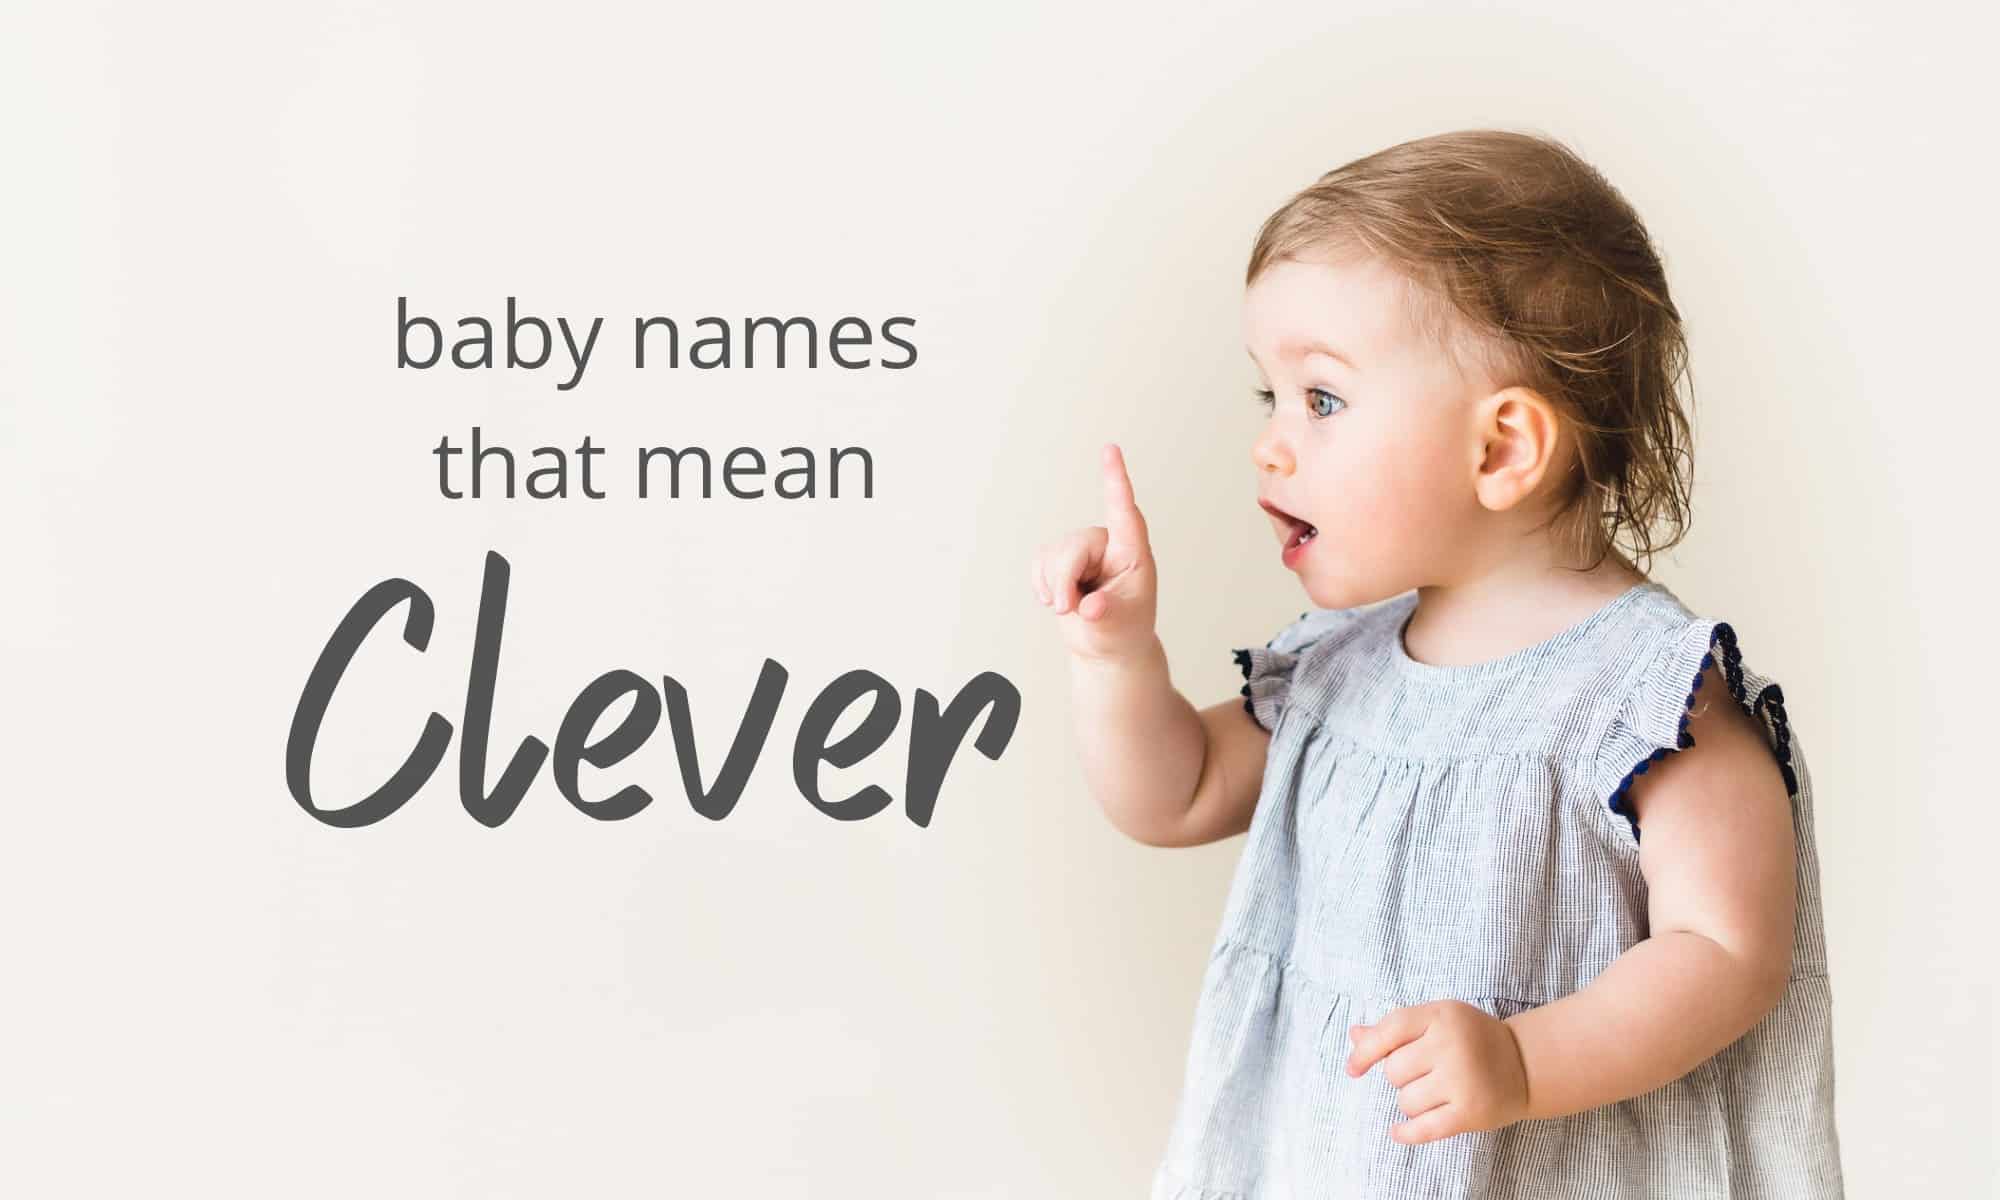 baby names that mean clever